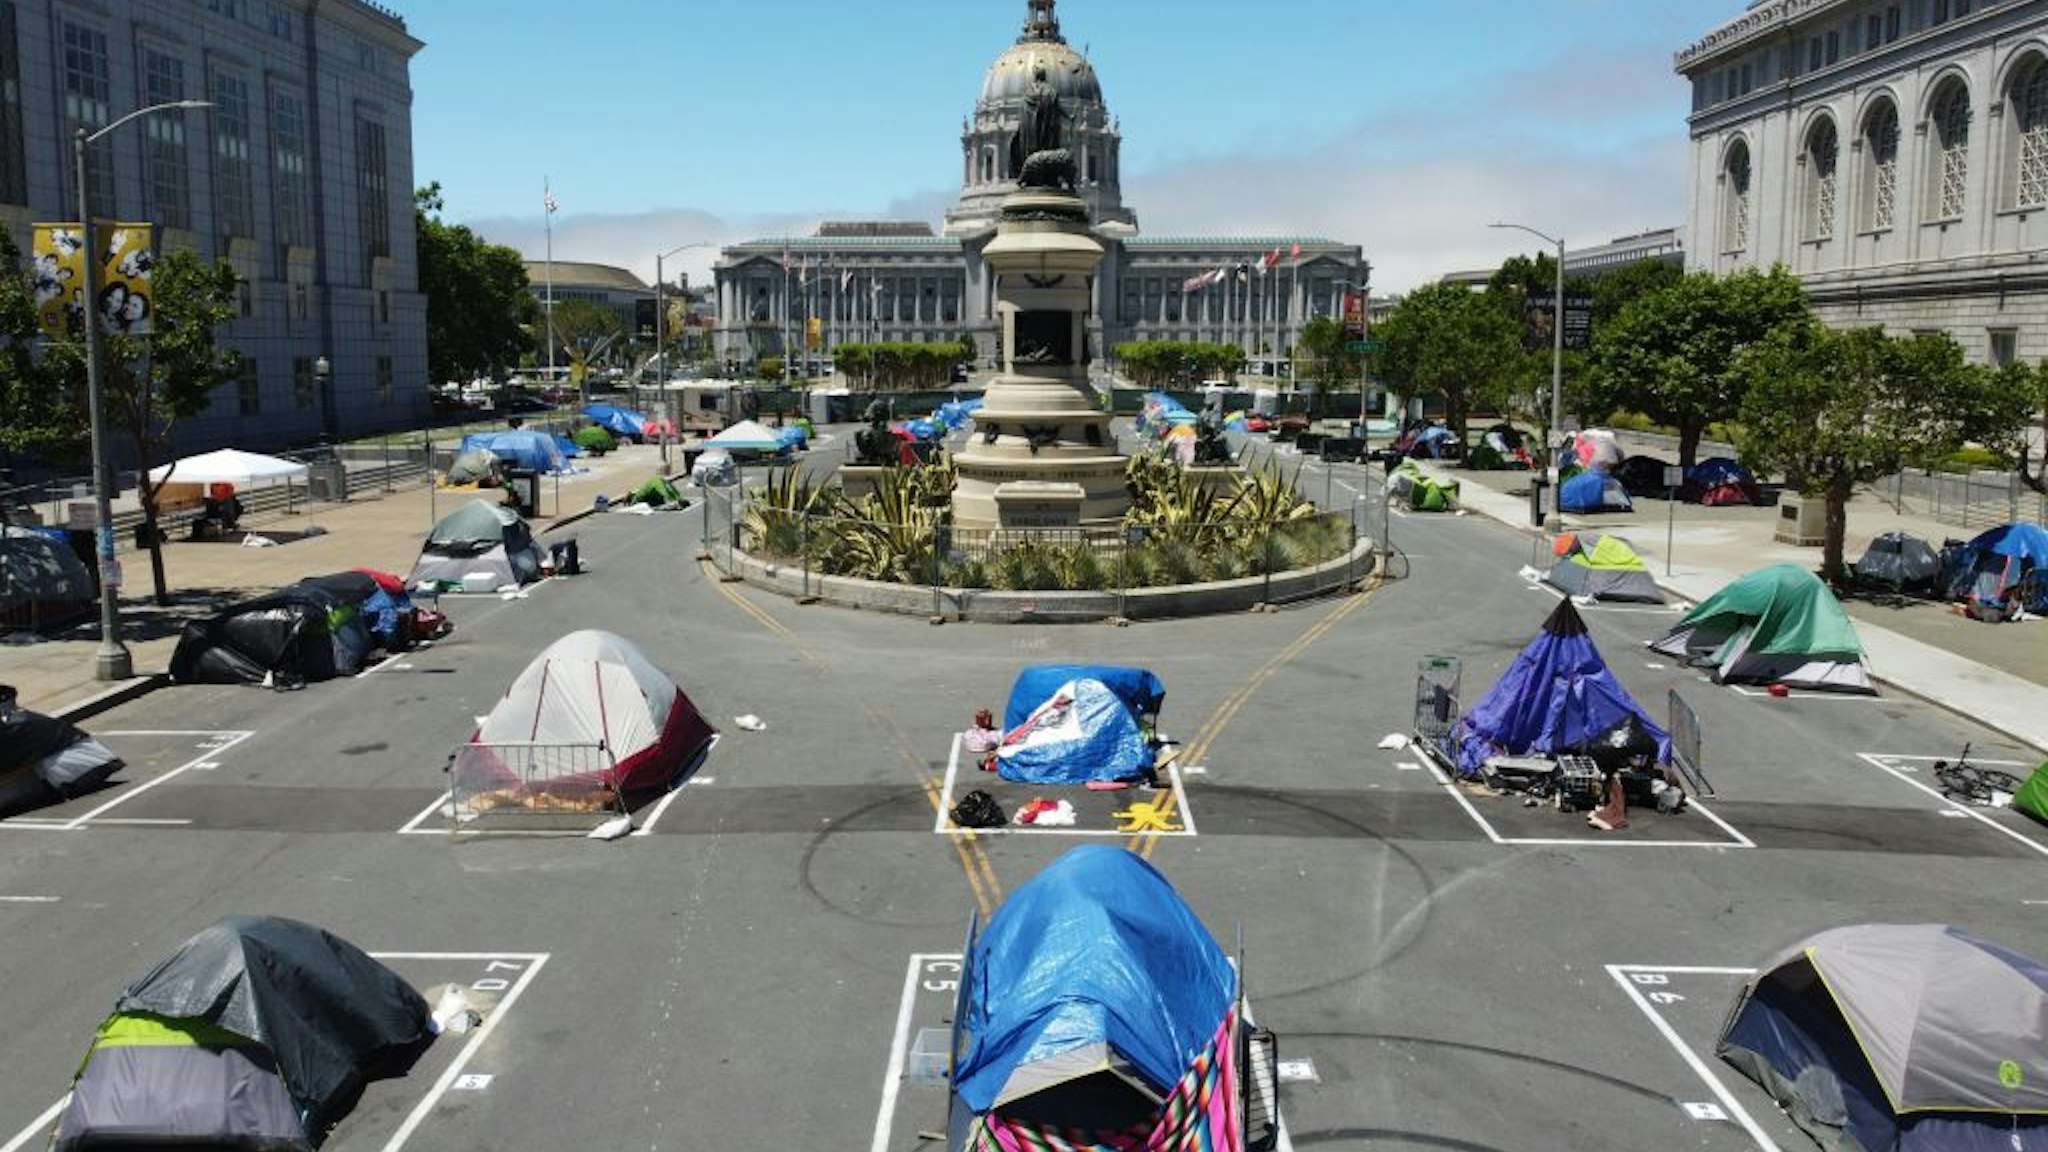 SAN FRANCISCO, CALIFORNIA - MAY 28: Aerial view of painted squares as temporary sanctioned tent encampment for the homeless across from the City Hall amid the coronavirus epidemic on May 28, 2020 in San Francisco, California.